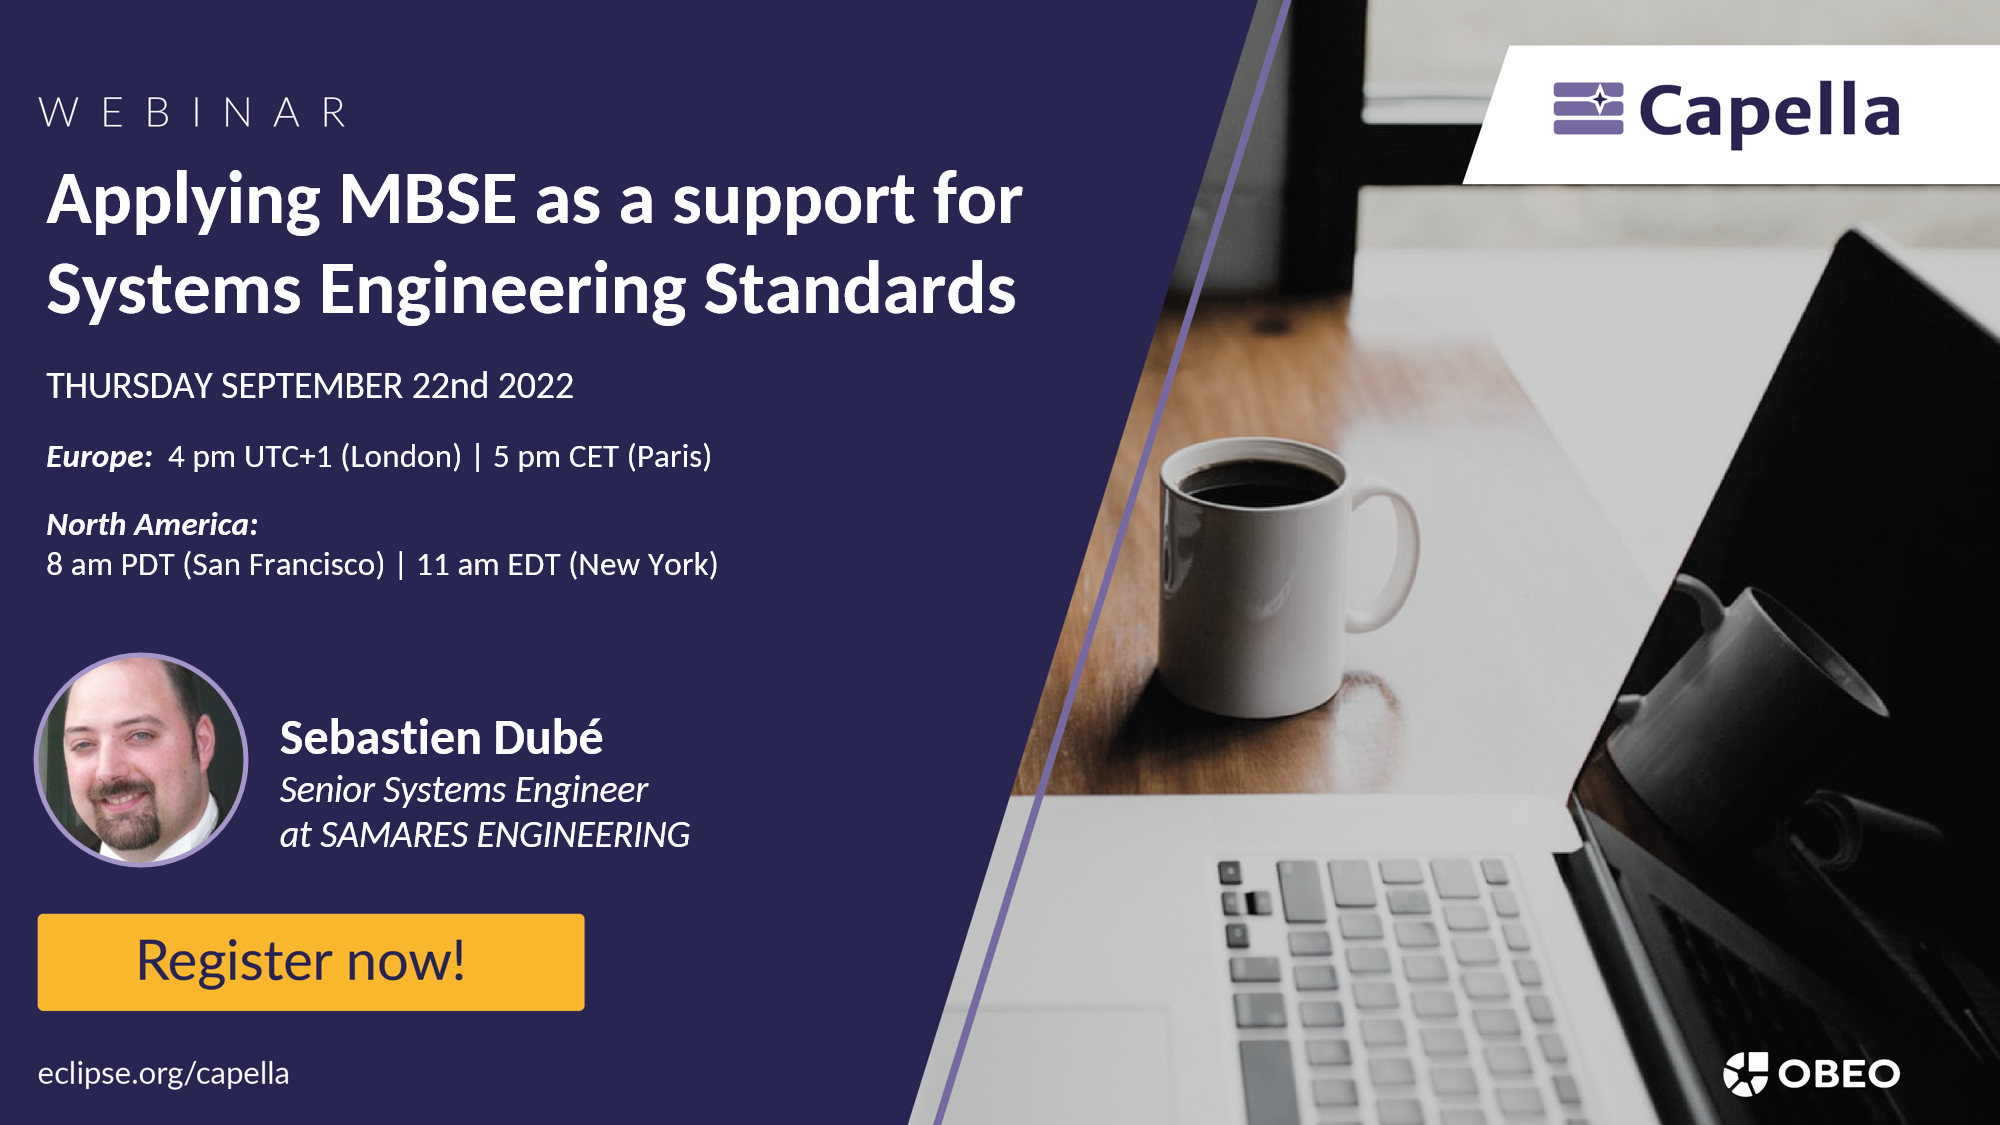 Applying MBSE as support for Systems Engineering Standards